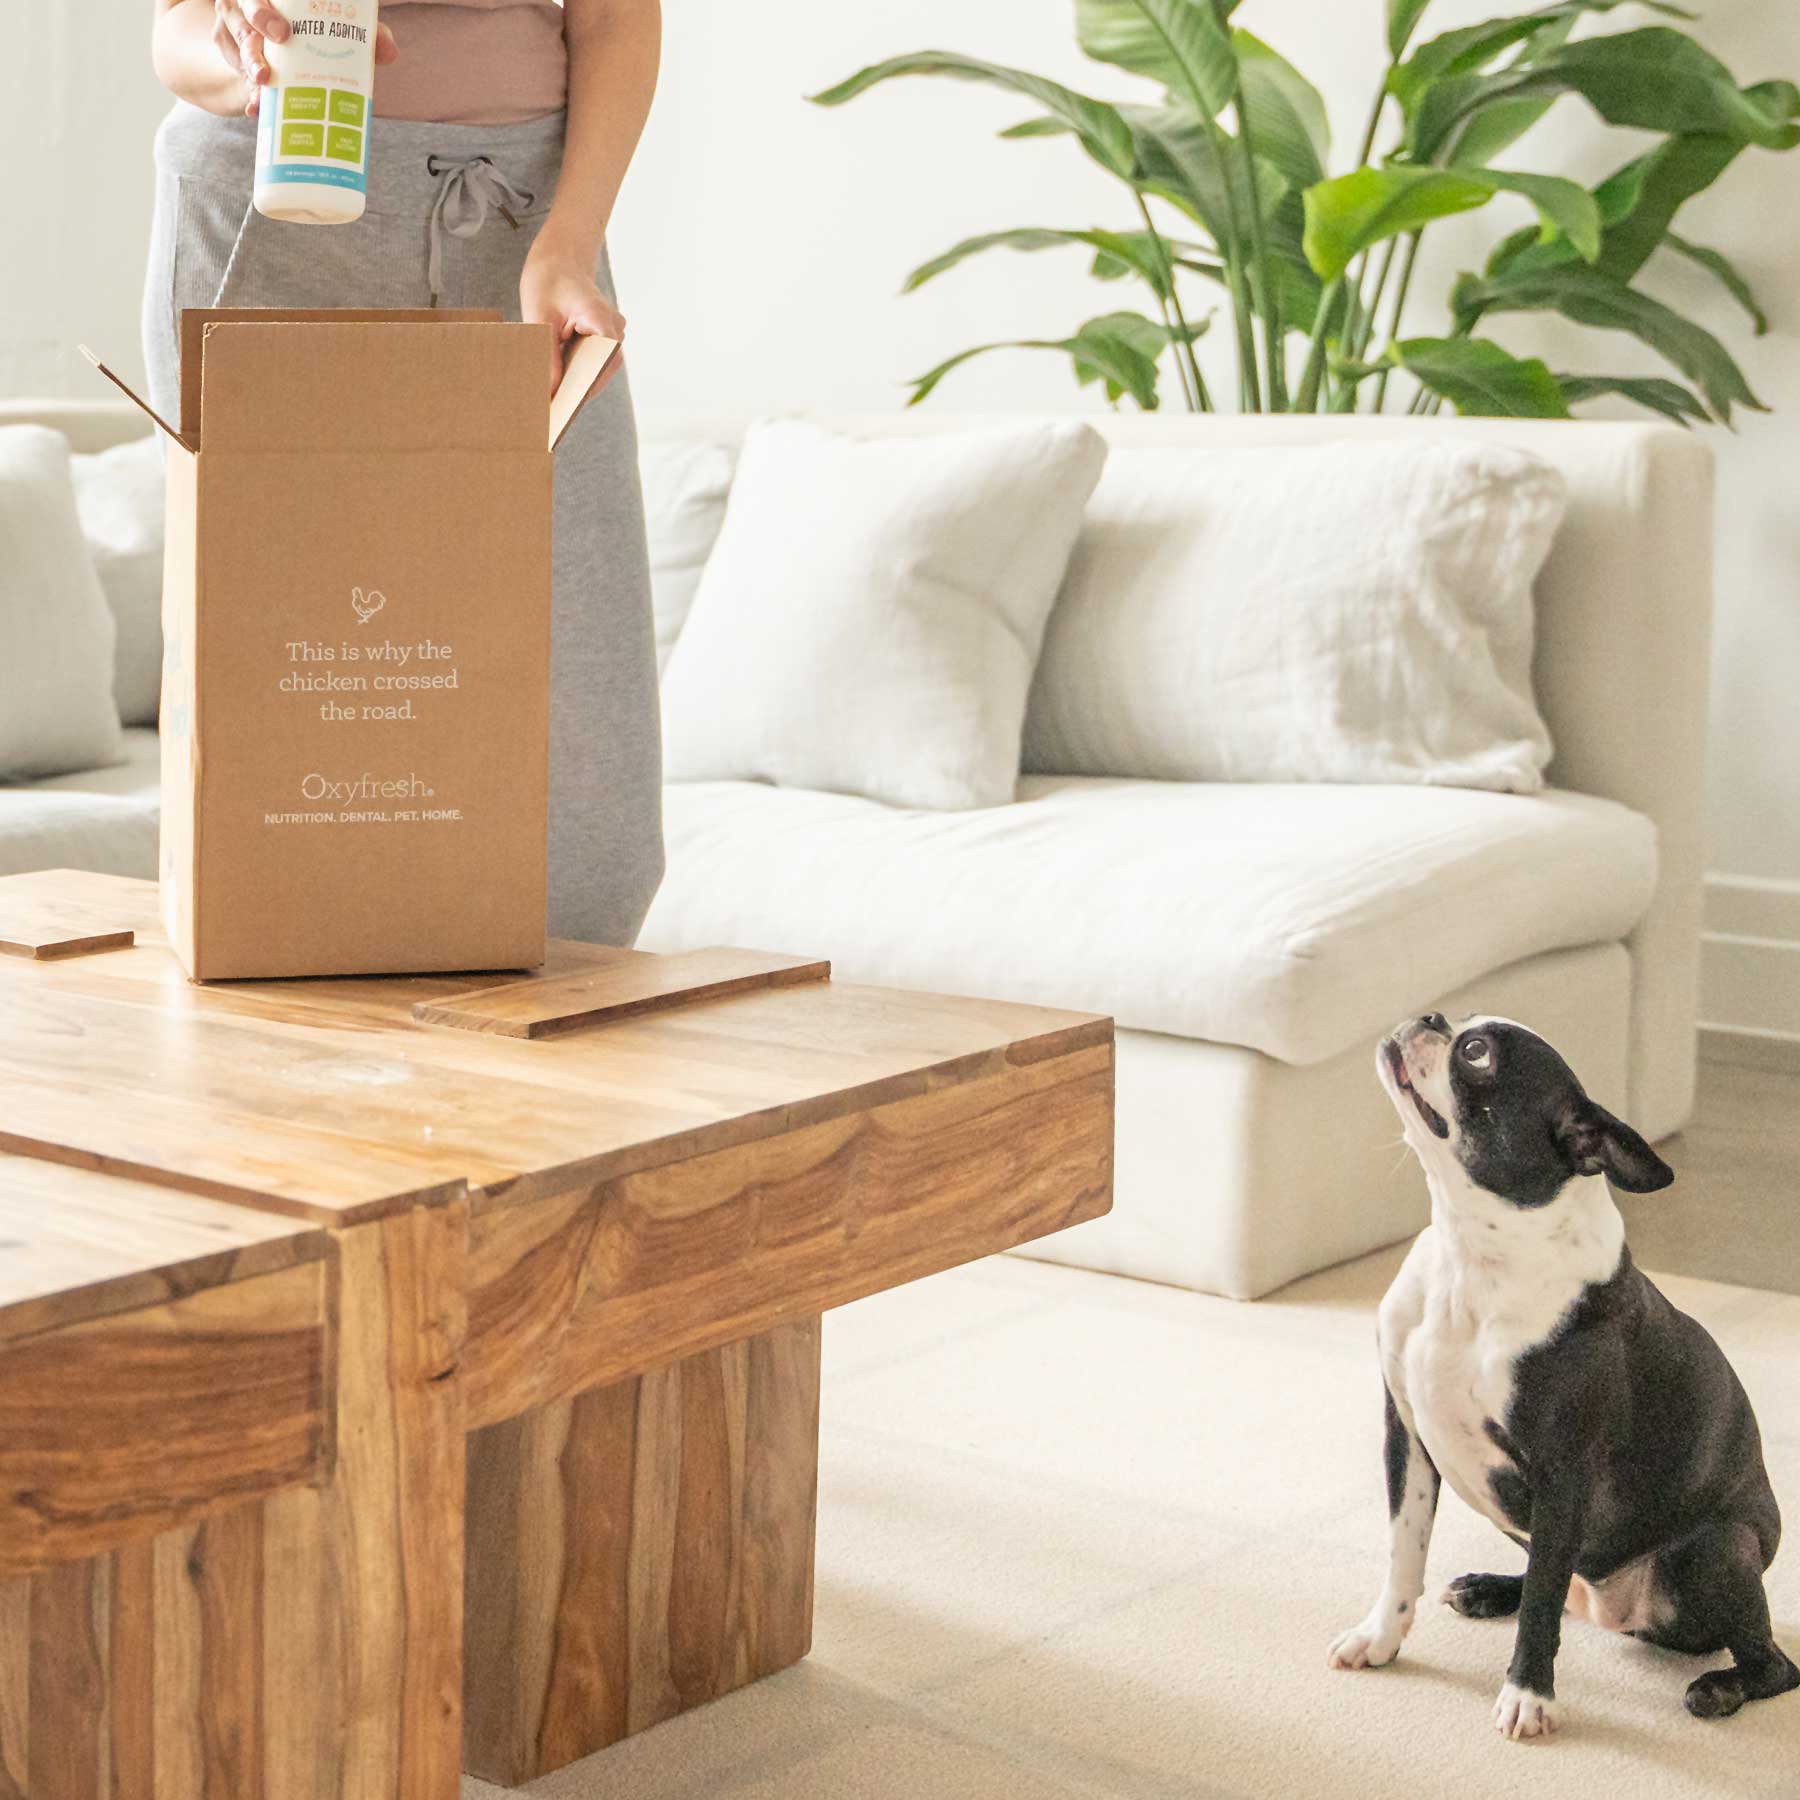 smiling dog sitting on floor looking up at woman opening a box of oxyfresh pet products